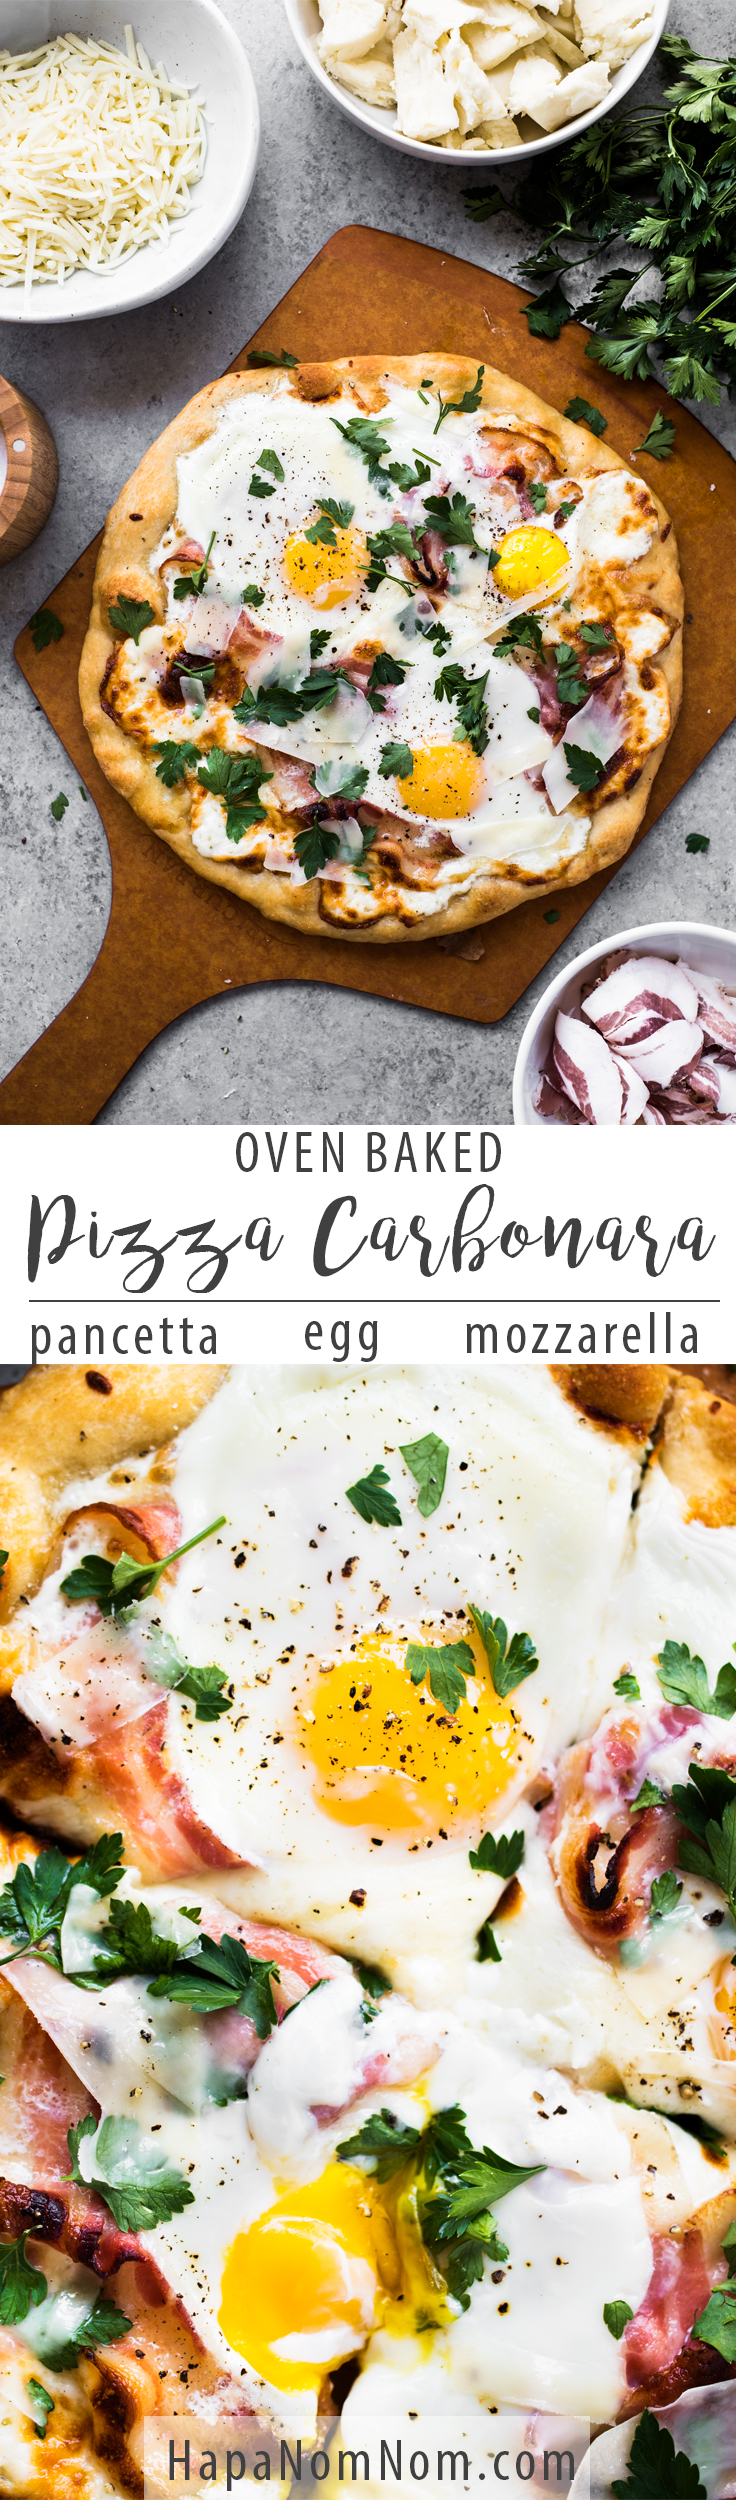 Roasted garlic, crispy pancetta, creamy sunny-side up eggs, and ooey-gooey cheese - makes this Pizza Carbonara irresistible! 